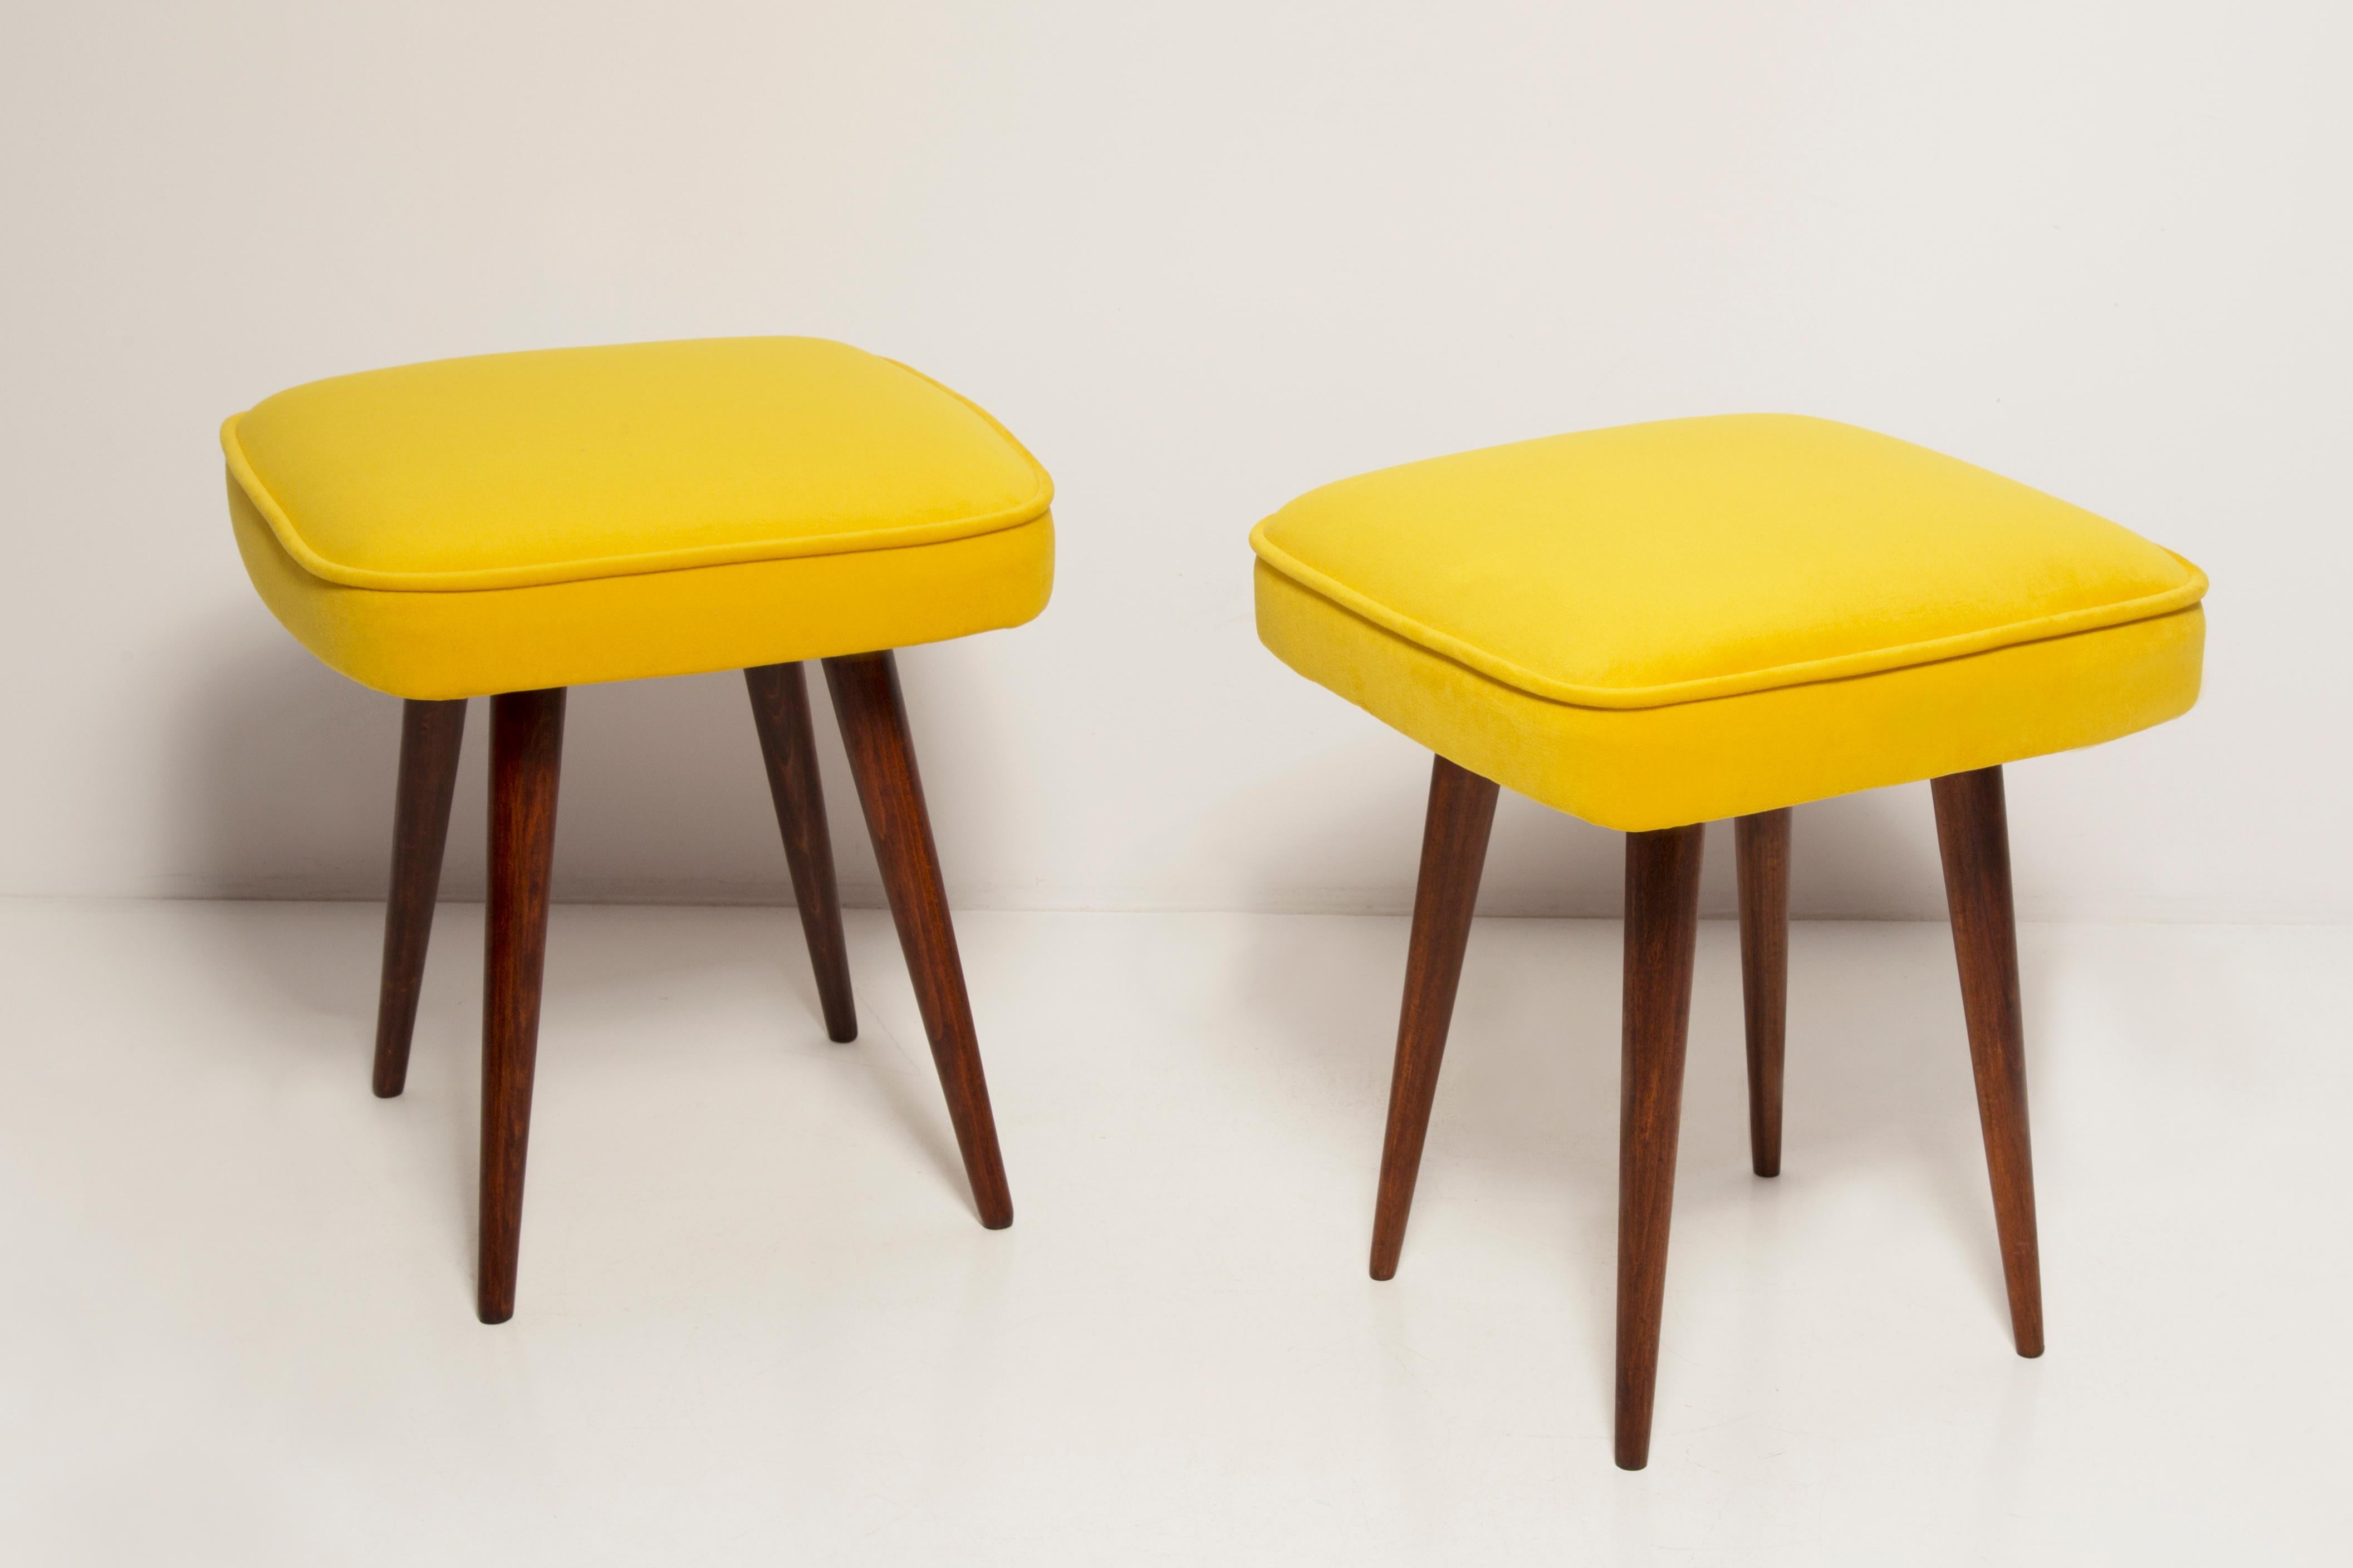 Hand-Crafted Set of Two Mid-Century Yellow Velvet Foot Stools, Europe, 1960s For Sale